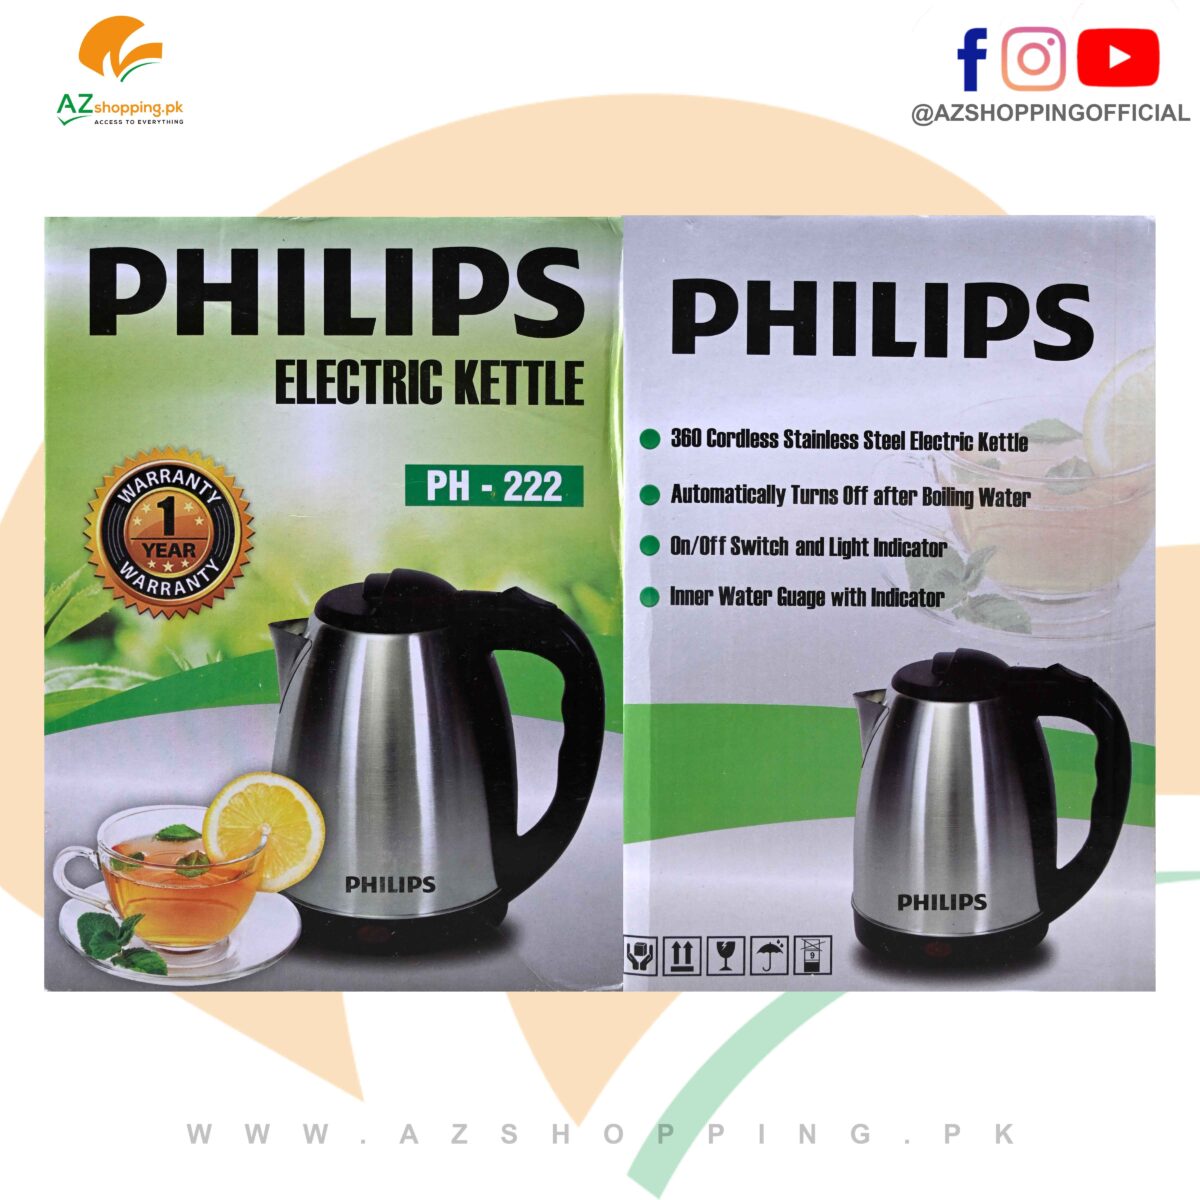 Philips 360 Cordless Stainless Steel Electric Kettle (1.8 Liter) – Model PH-222